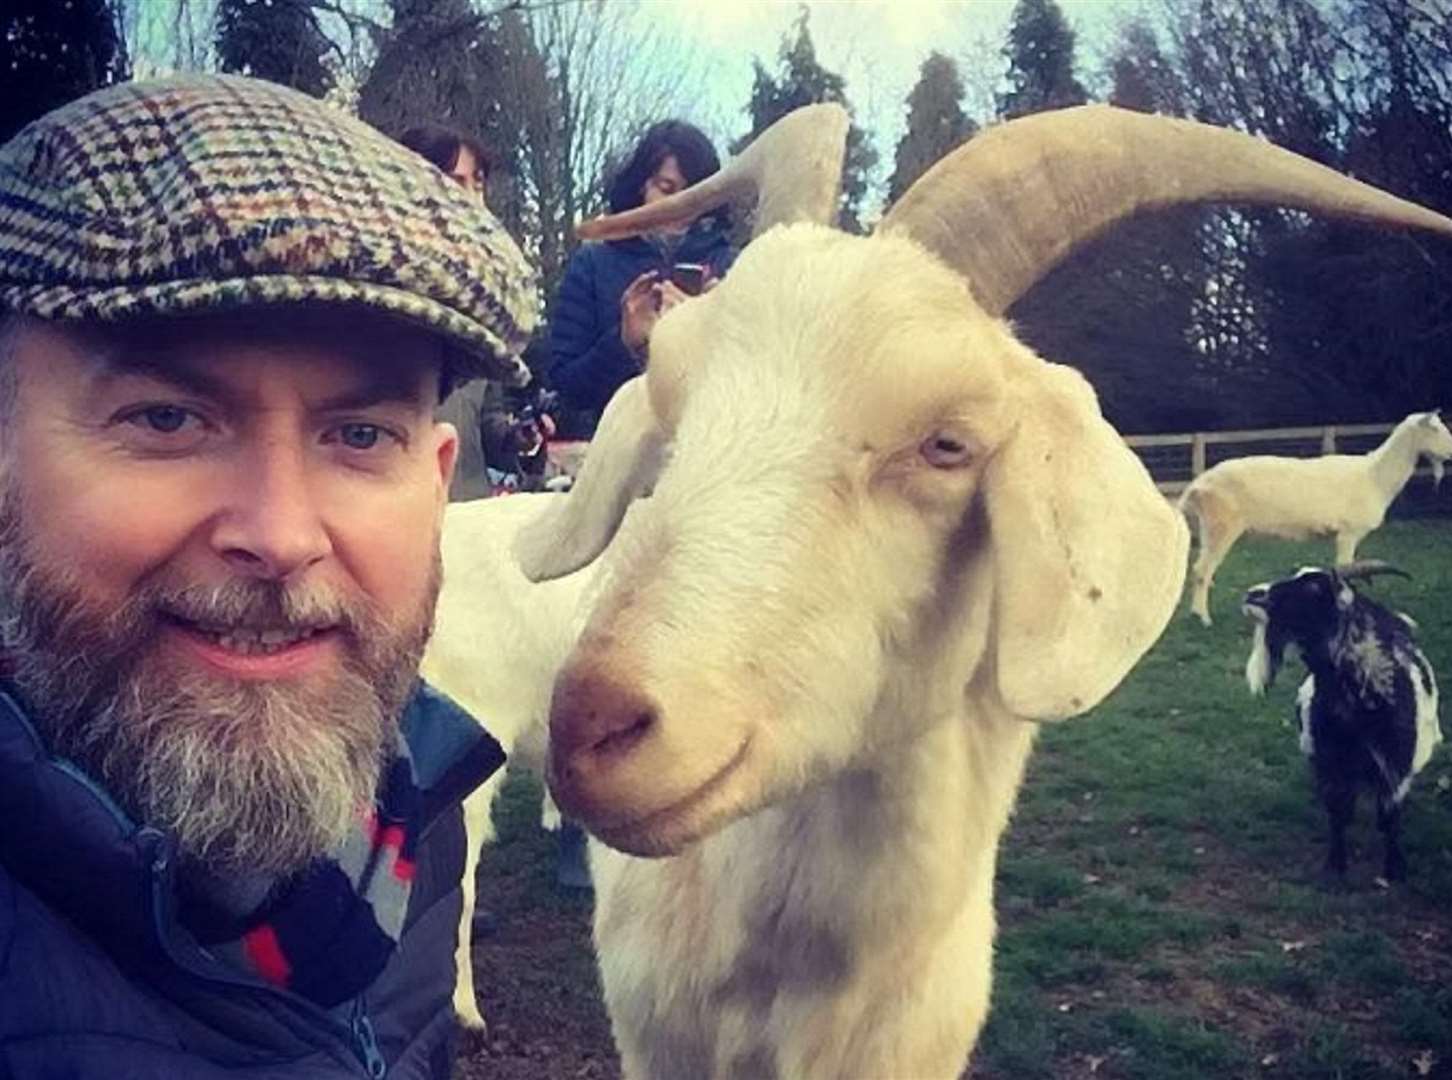 Dr Alan McElligott with one of the goats tested. Picture: SWNS